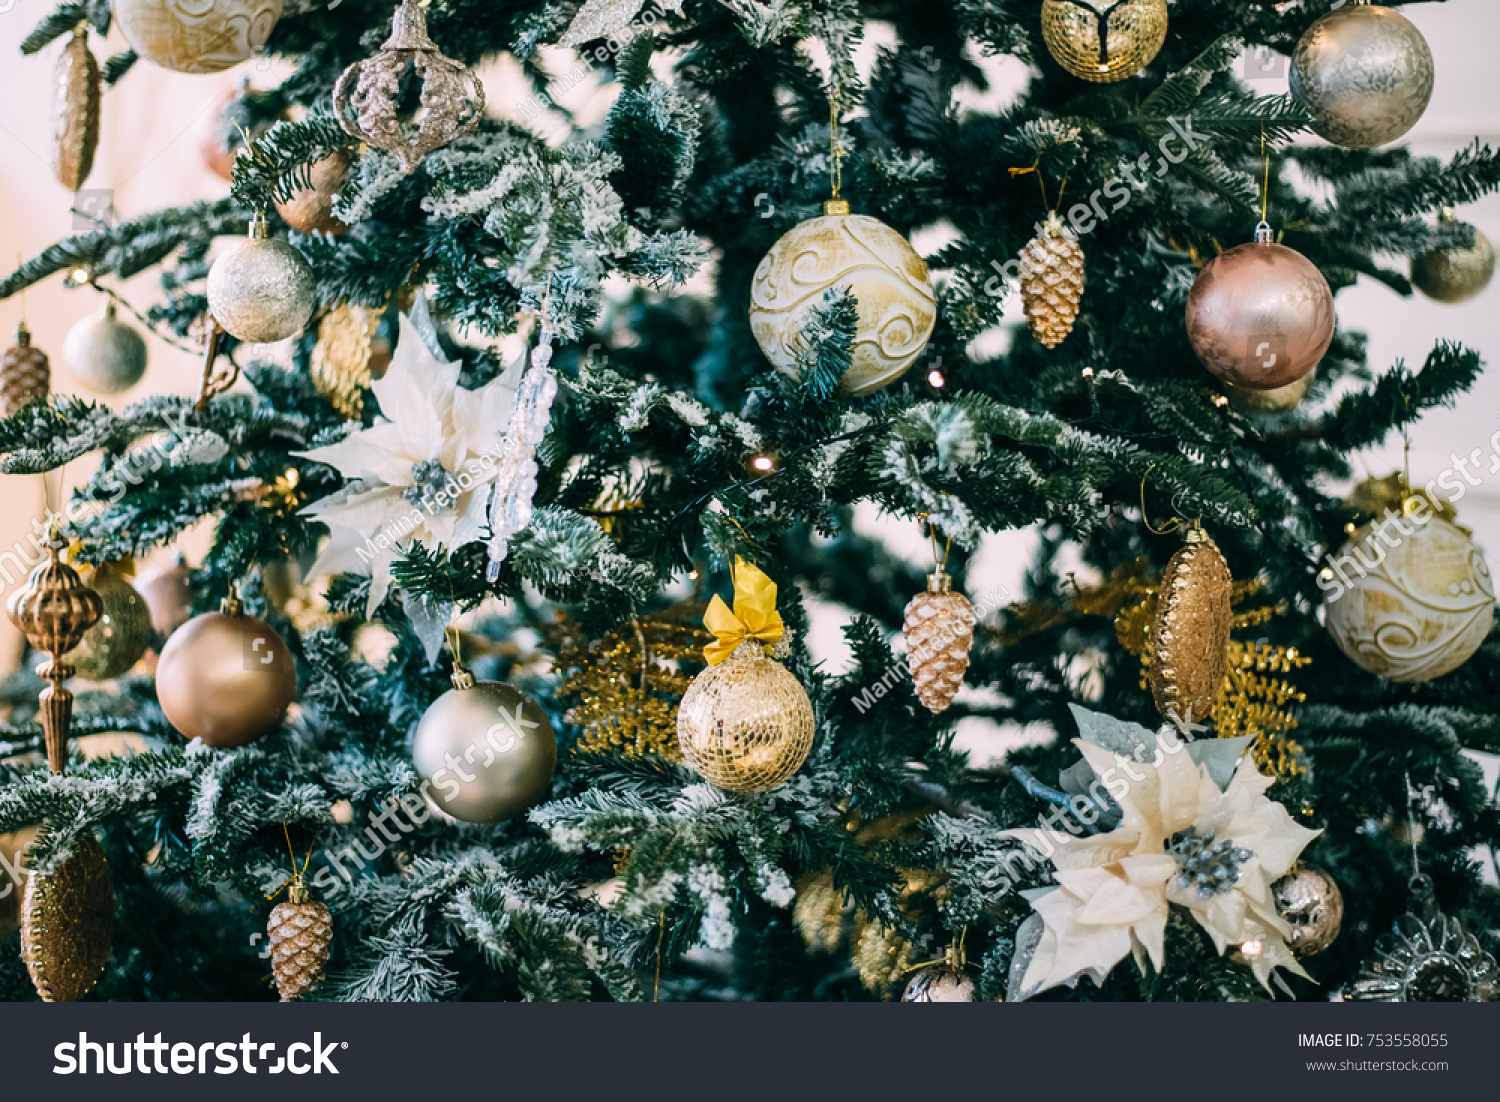 stock photo christmas tree with toys snowflakes and garland new year background